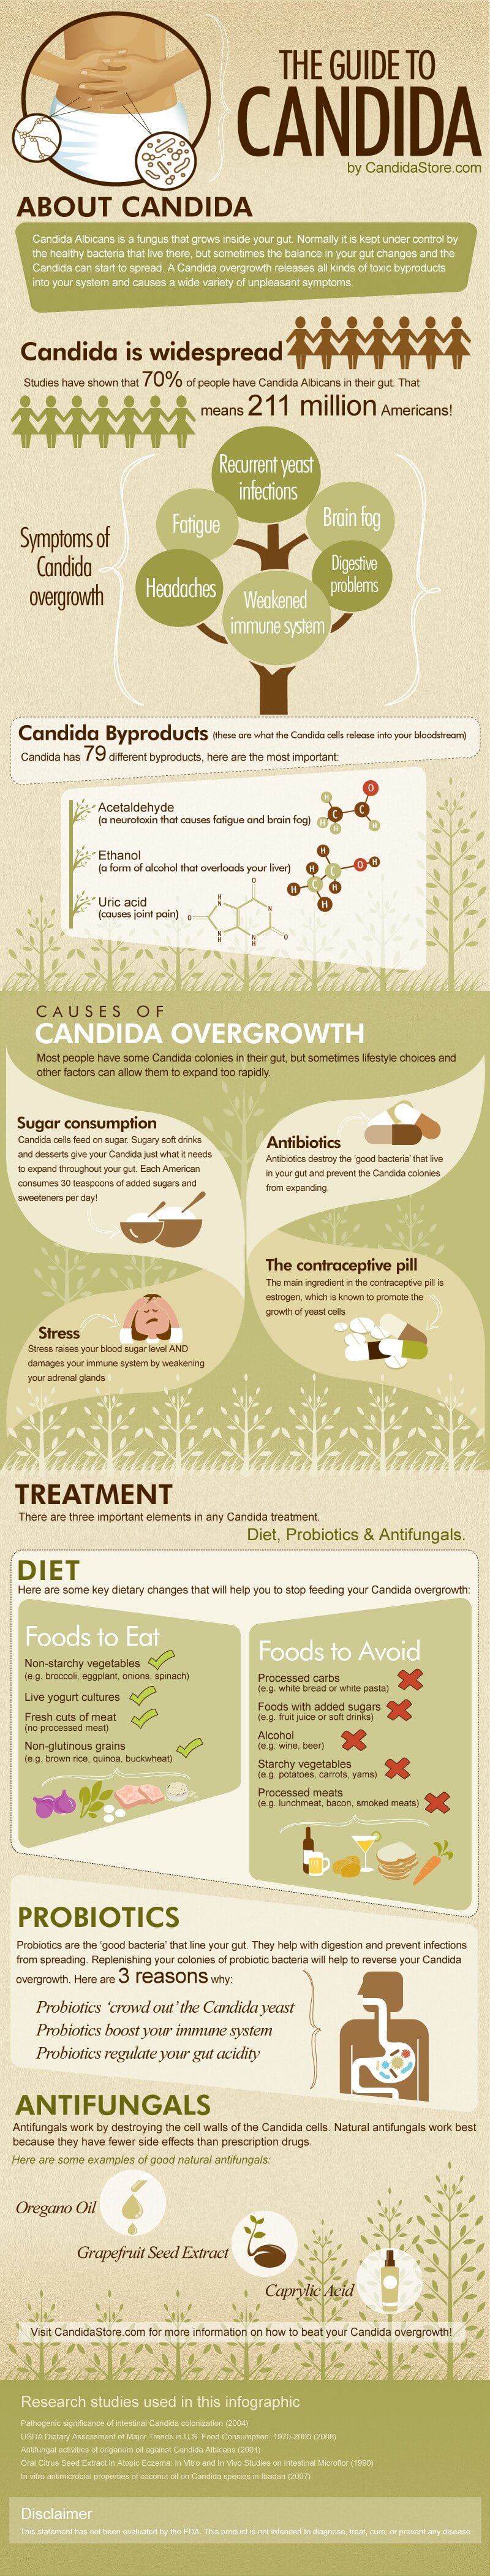 a-visual-guide-to-candida-the-candida-diet